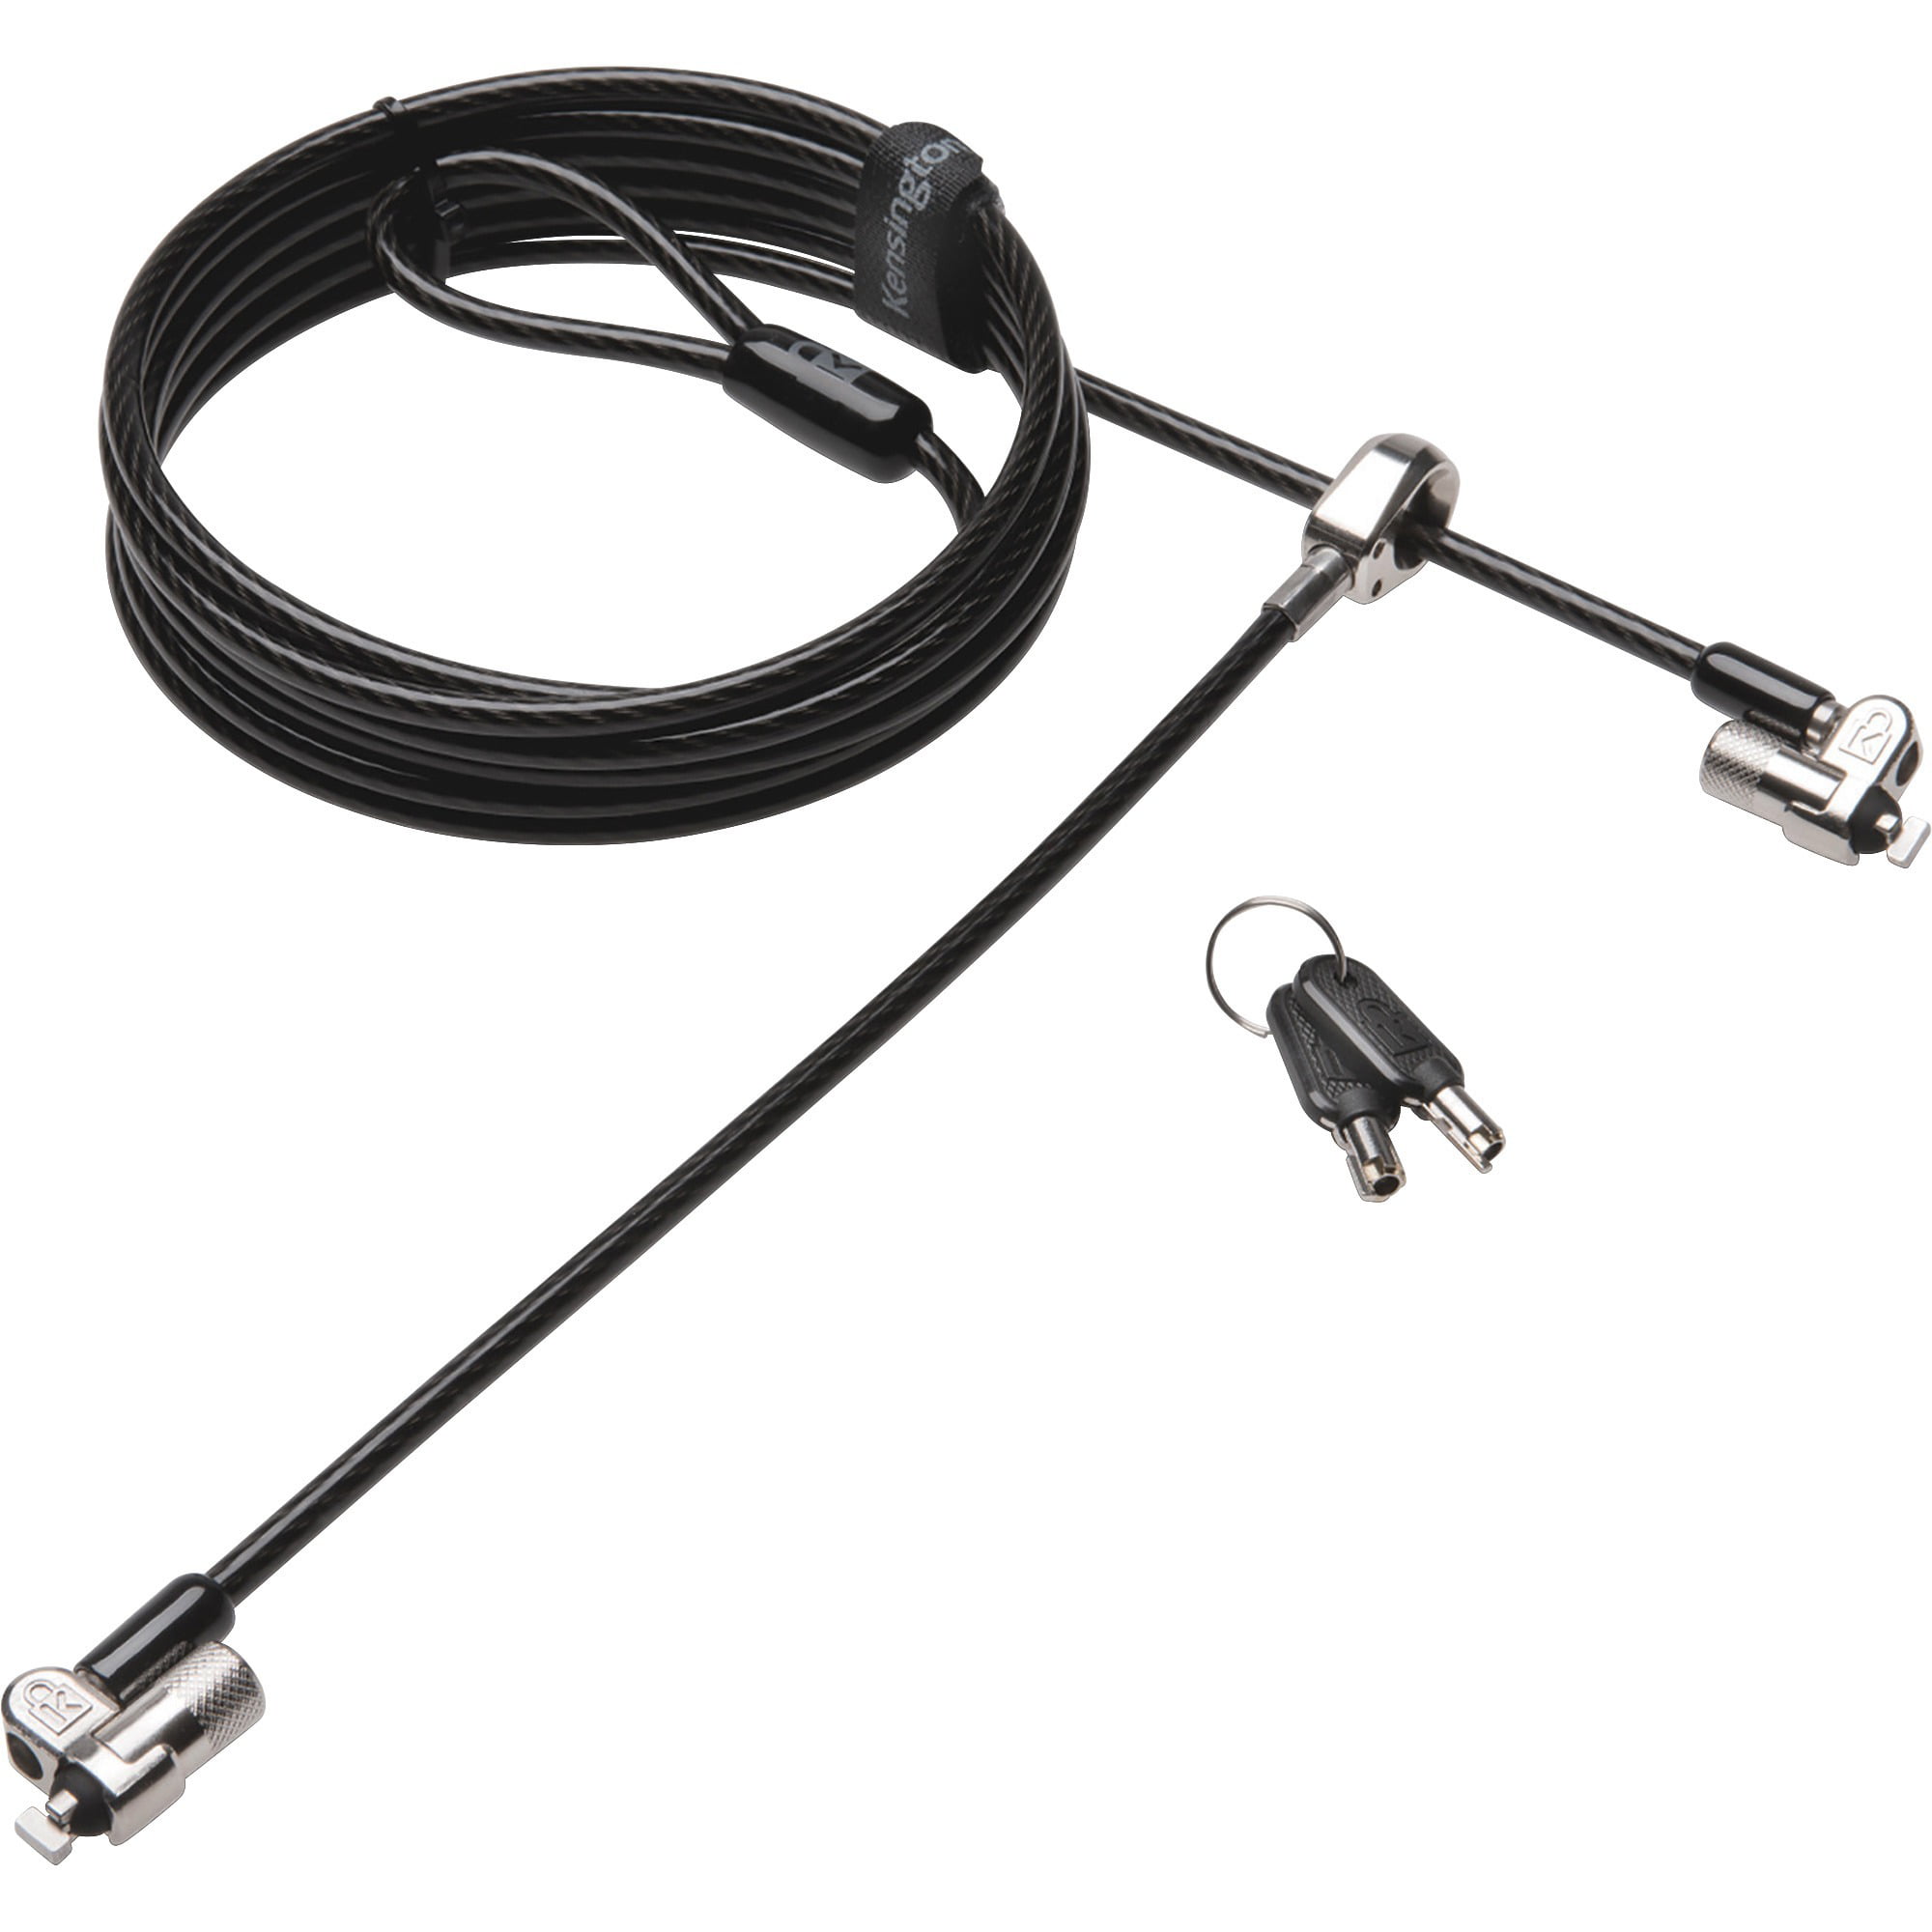 Renewed K65048WW Kensington MicroSaver 2.0 Keyed Twin Cable Lock for Laptops & Other Devices 